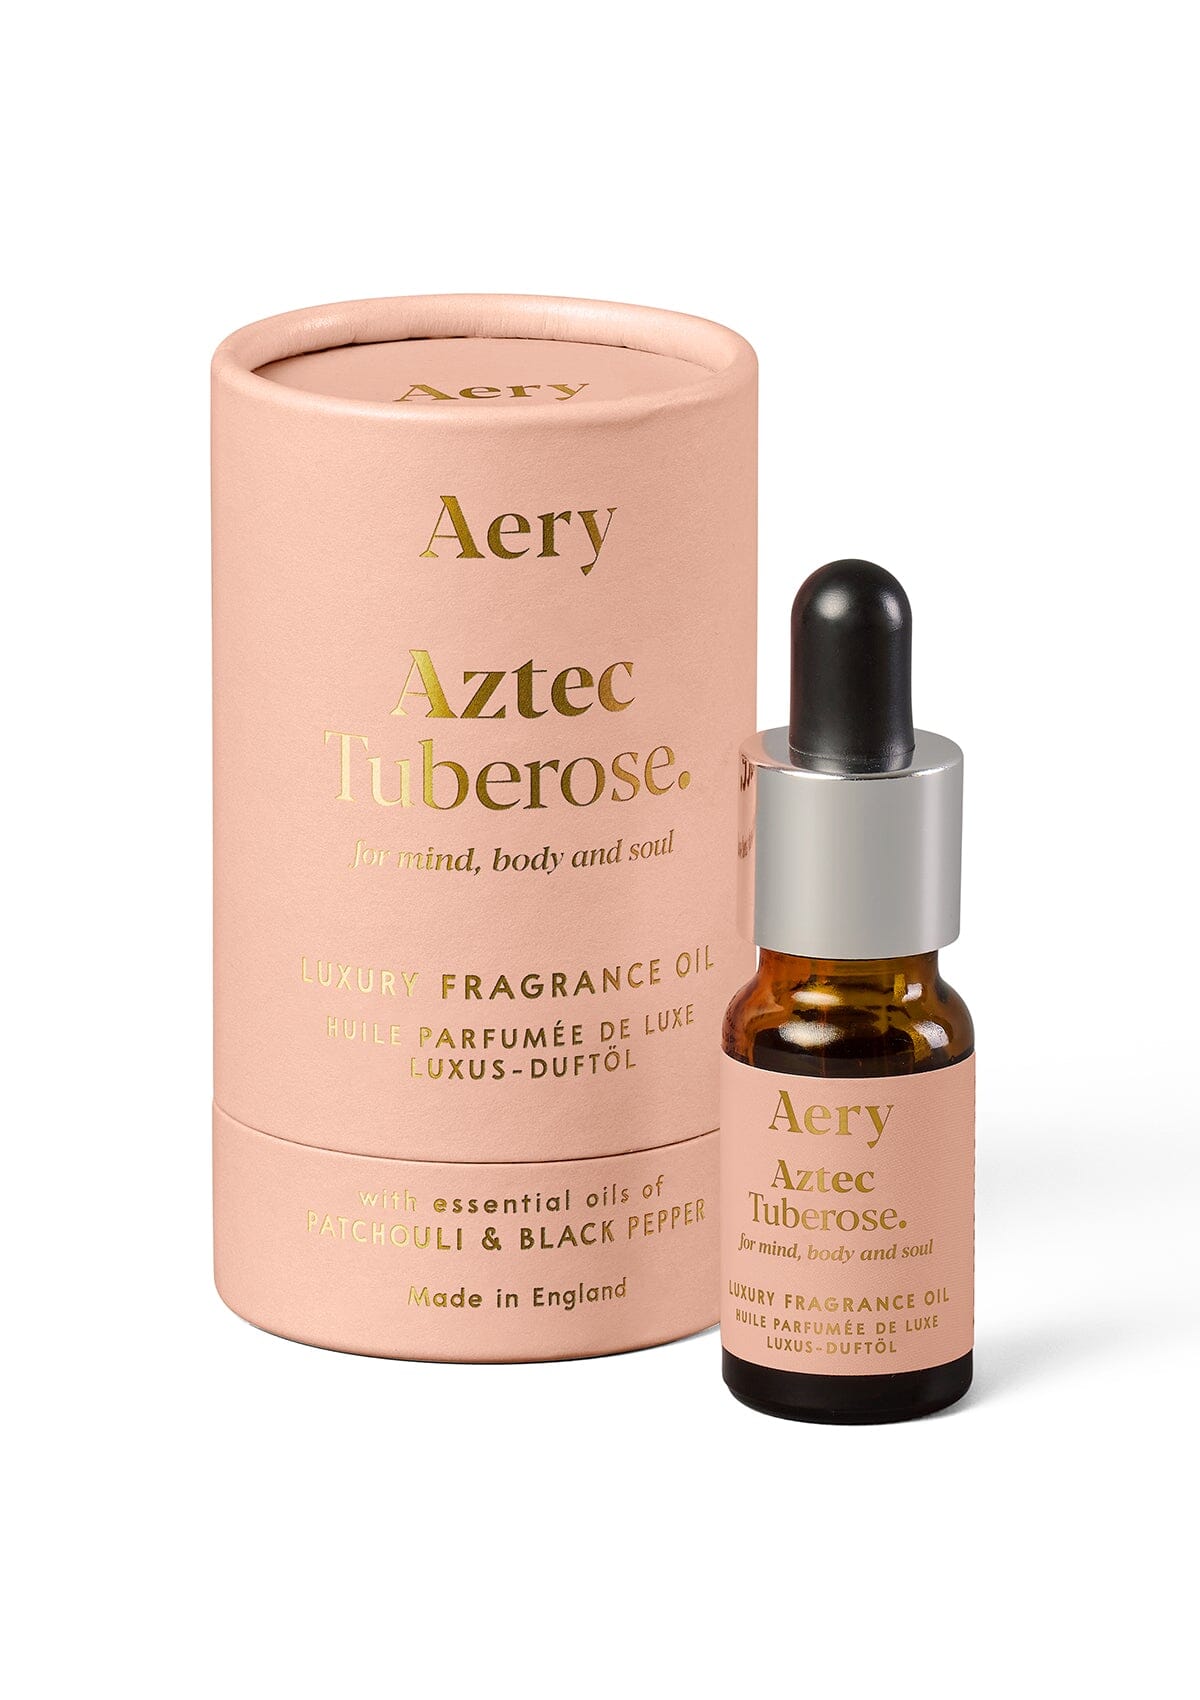 Peach Aztec Tuberose fragrance oil displayed next to product packaging by Aery on white background 